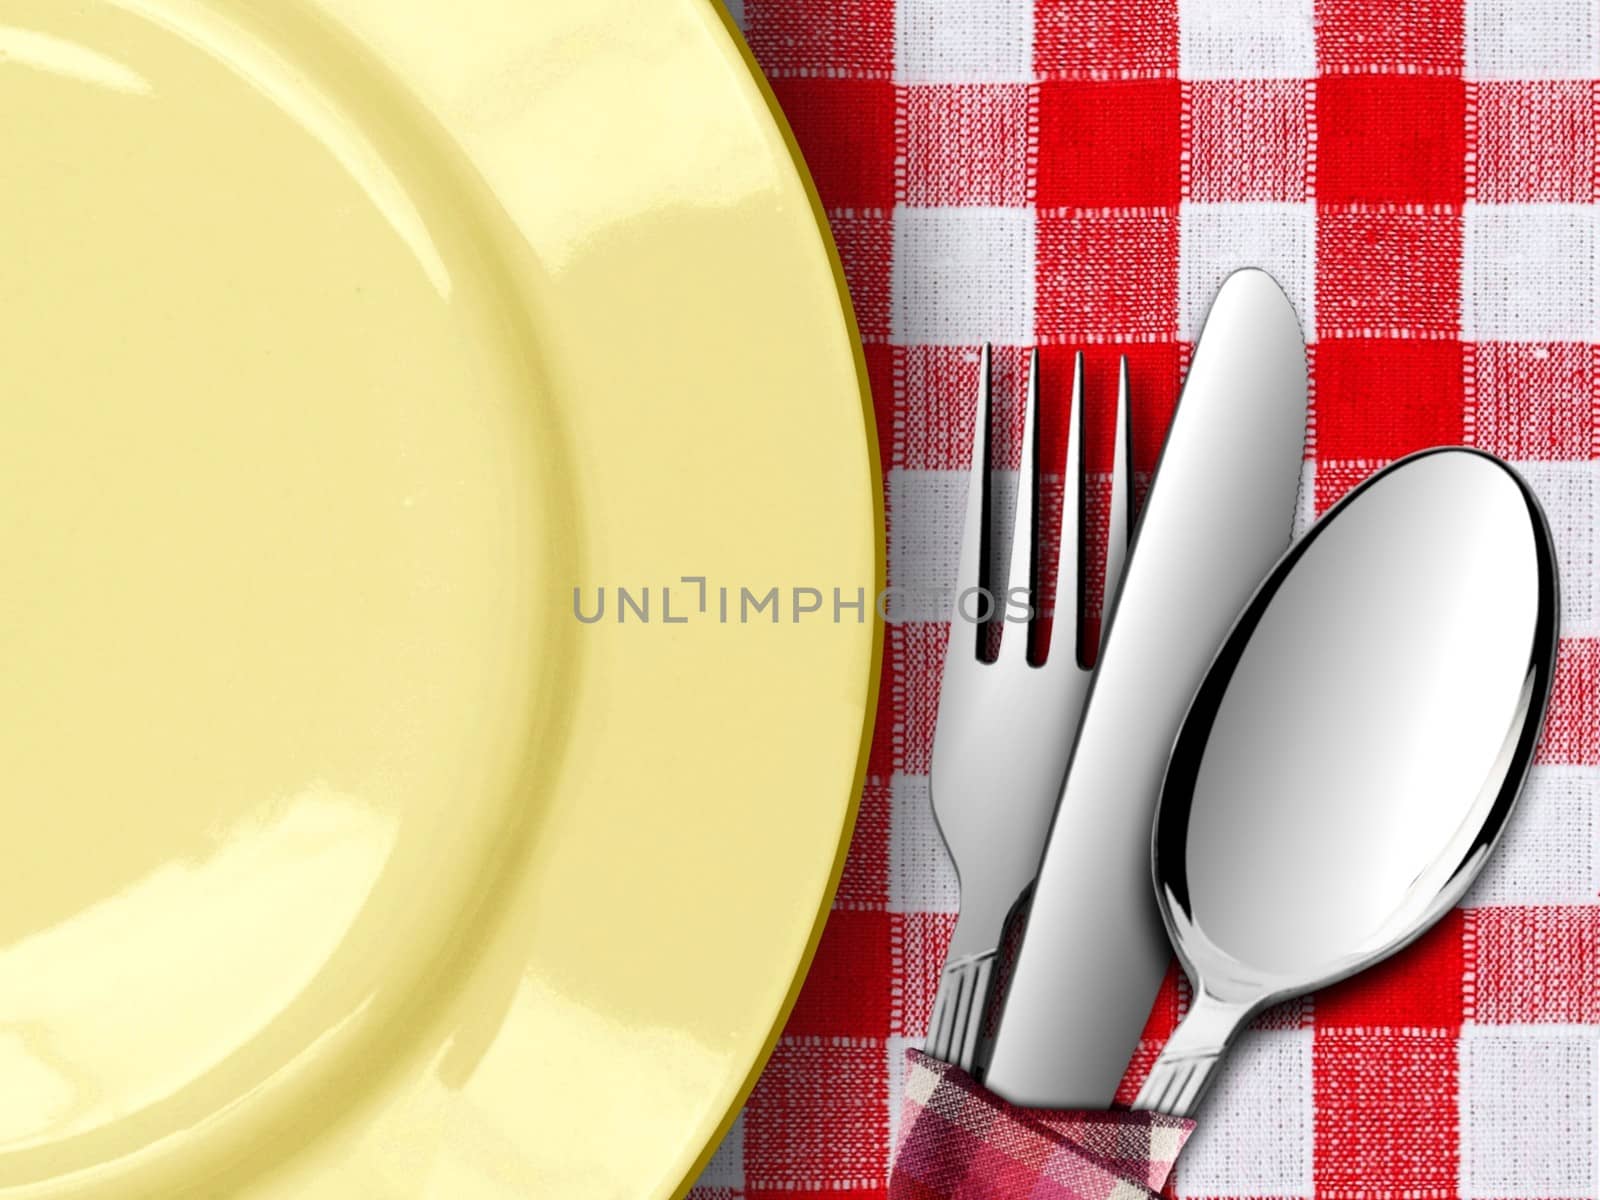 Plate with Fork and knife on Red Tablecloth